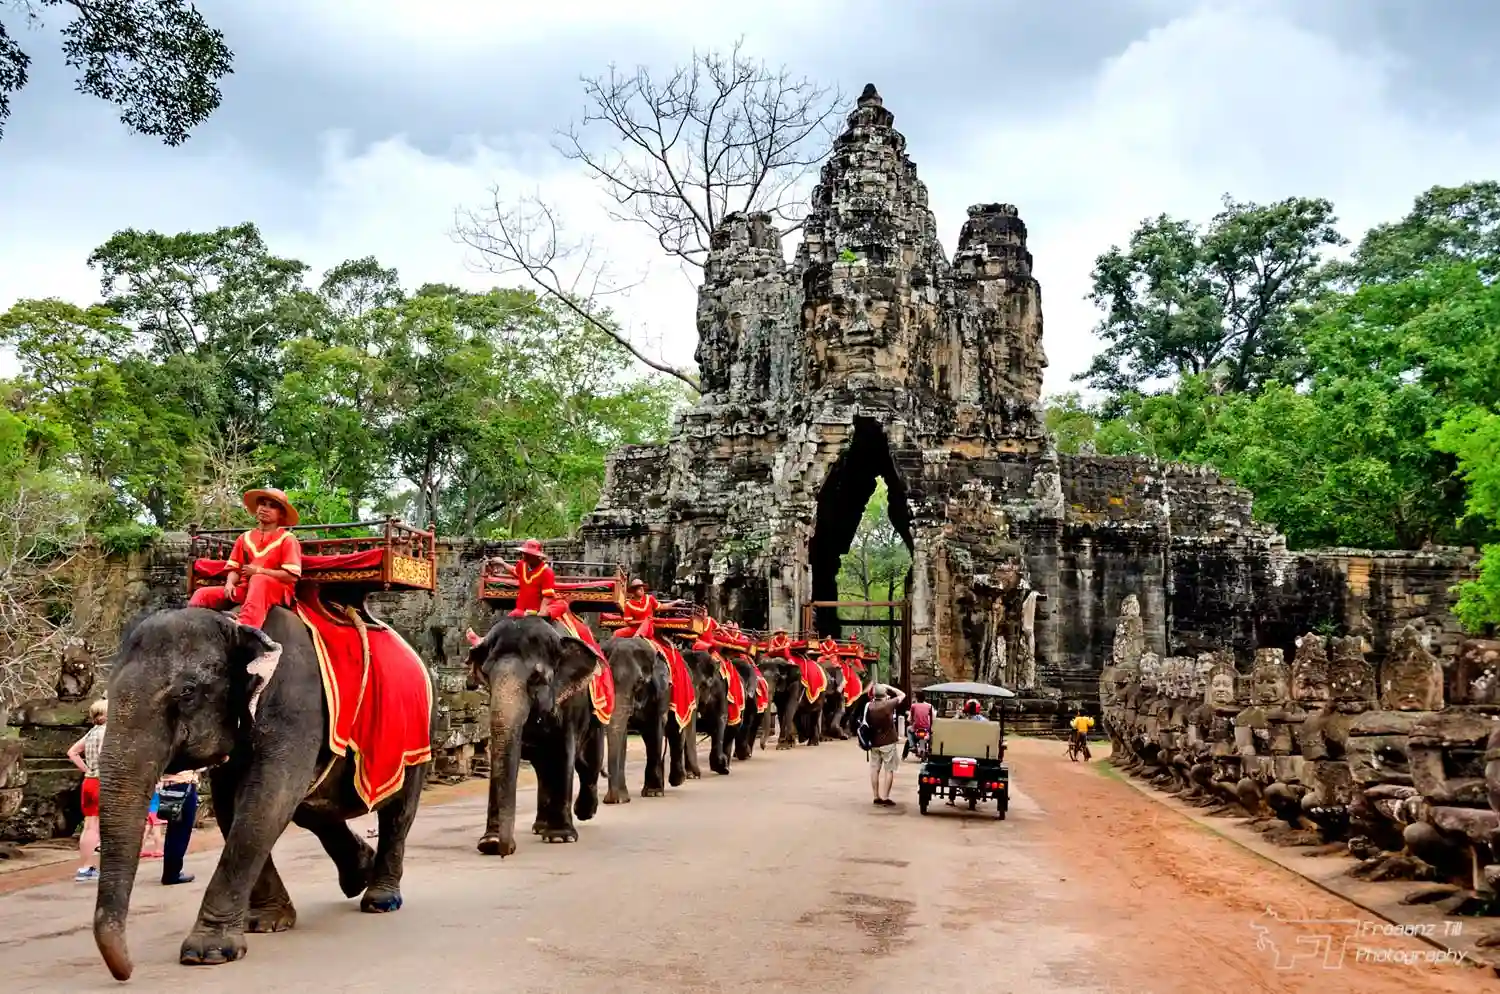 Cambodia Tour Siem Reap, Cambodia Tourism In Cambodia Cheapest Places To Travel When You're Young And Broke